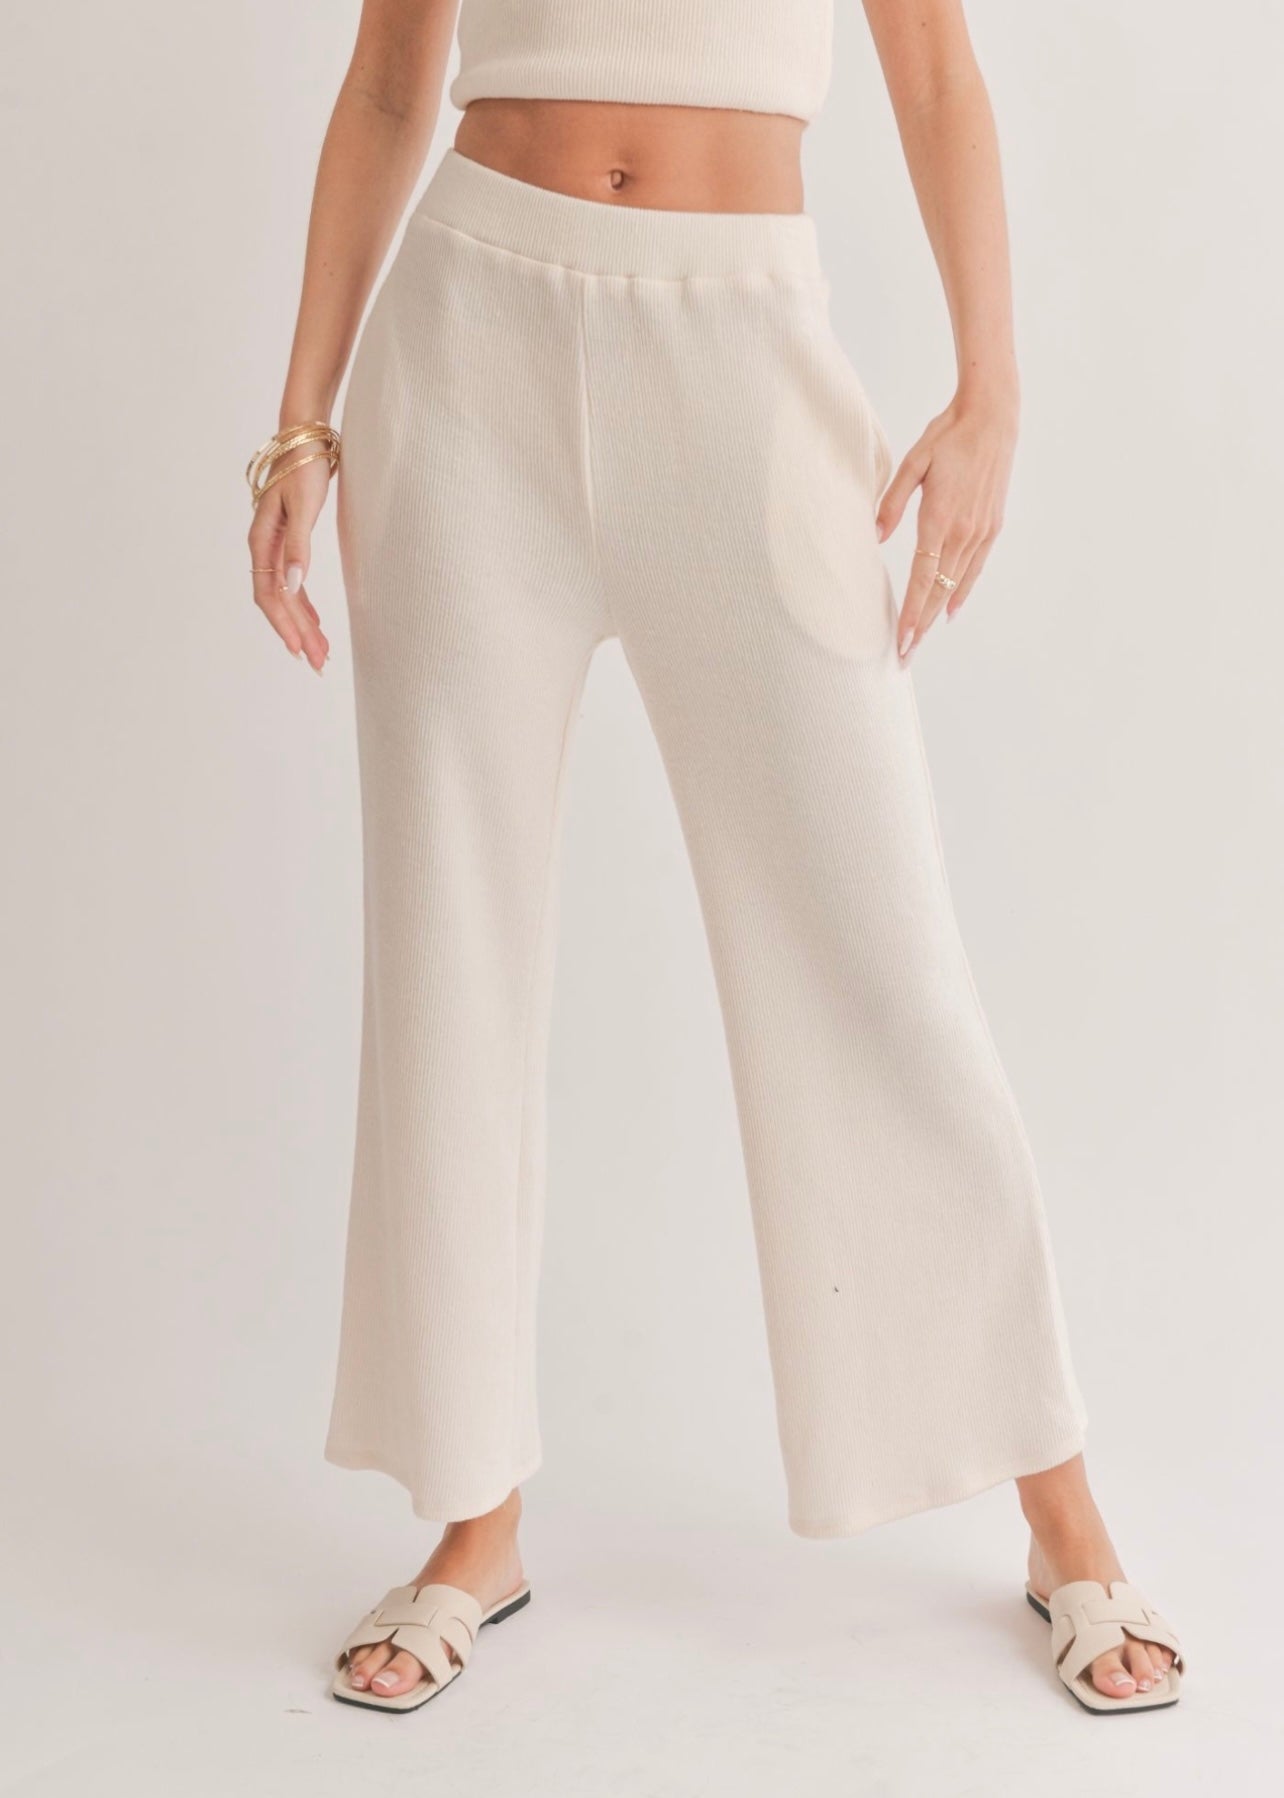 Sage the Label Easily Lounge Pants